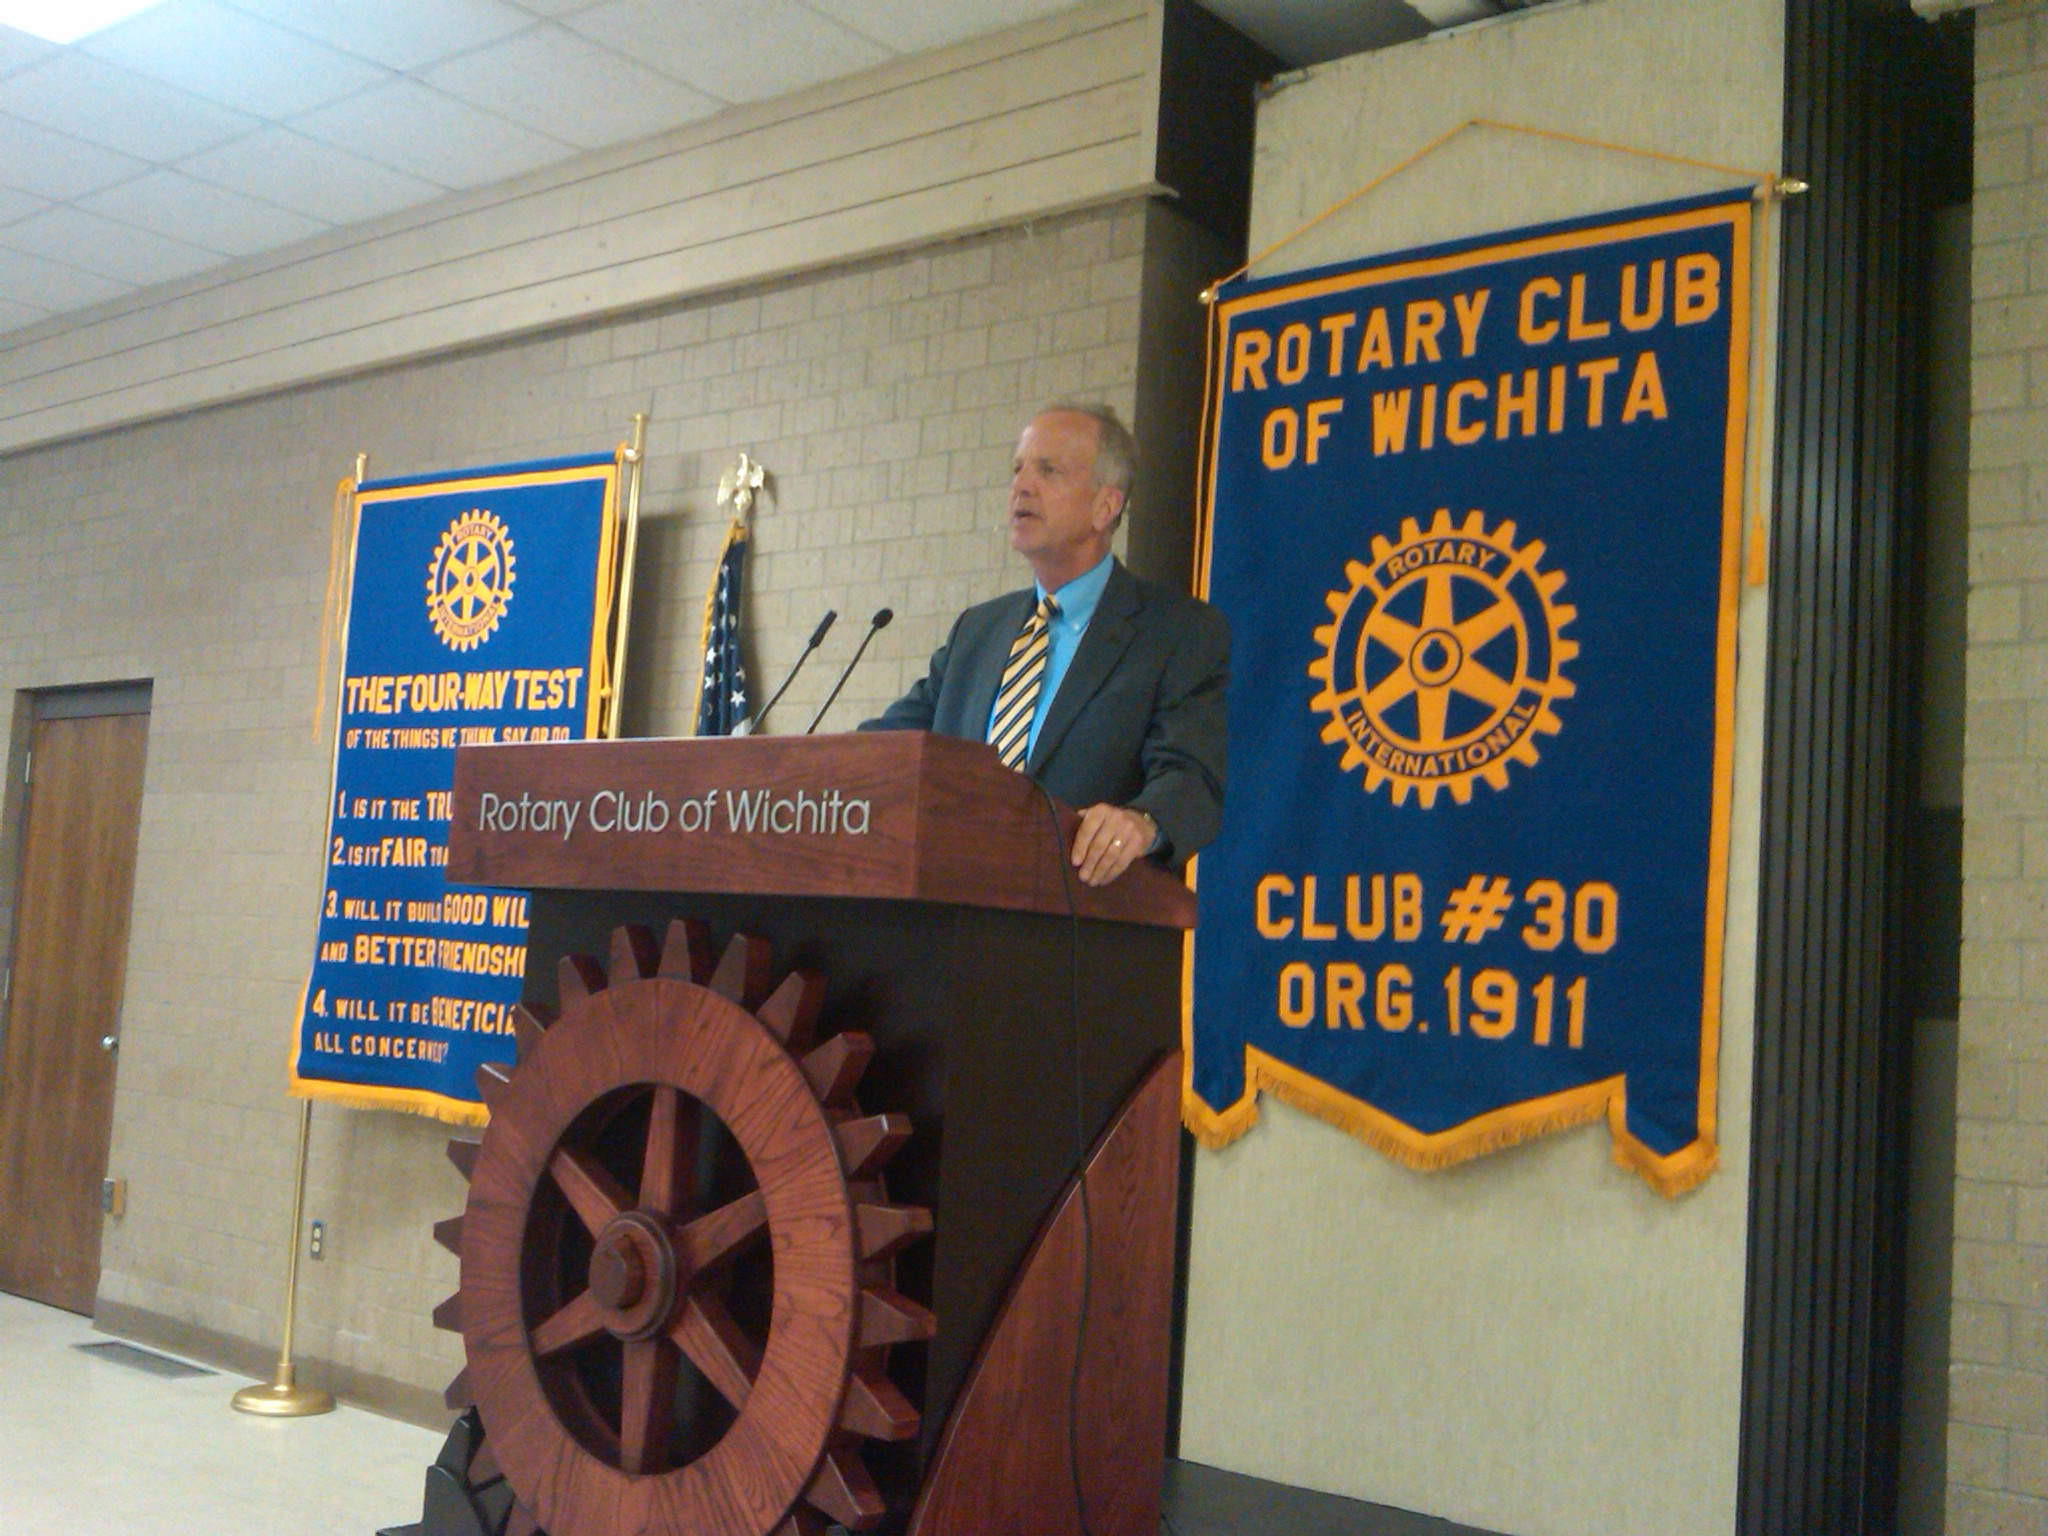 Meeting with business and professional leaders at the Rotary Club of Wichita